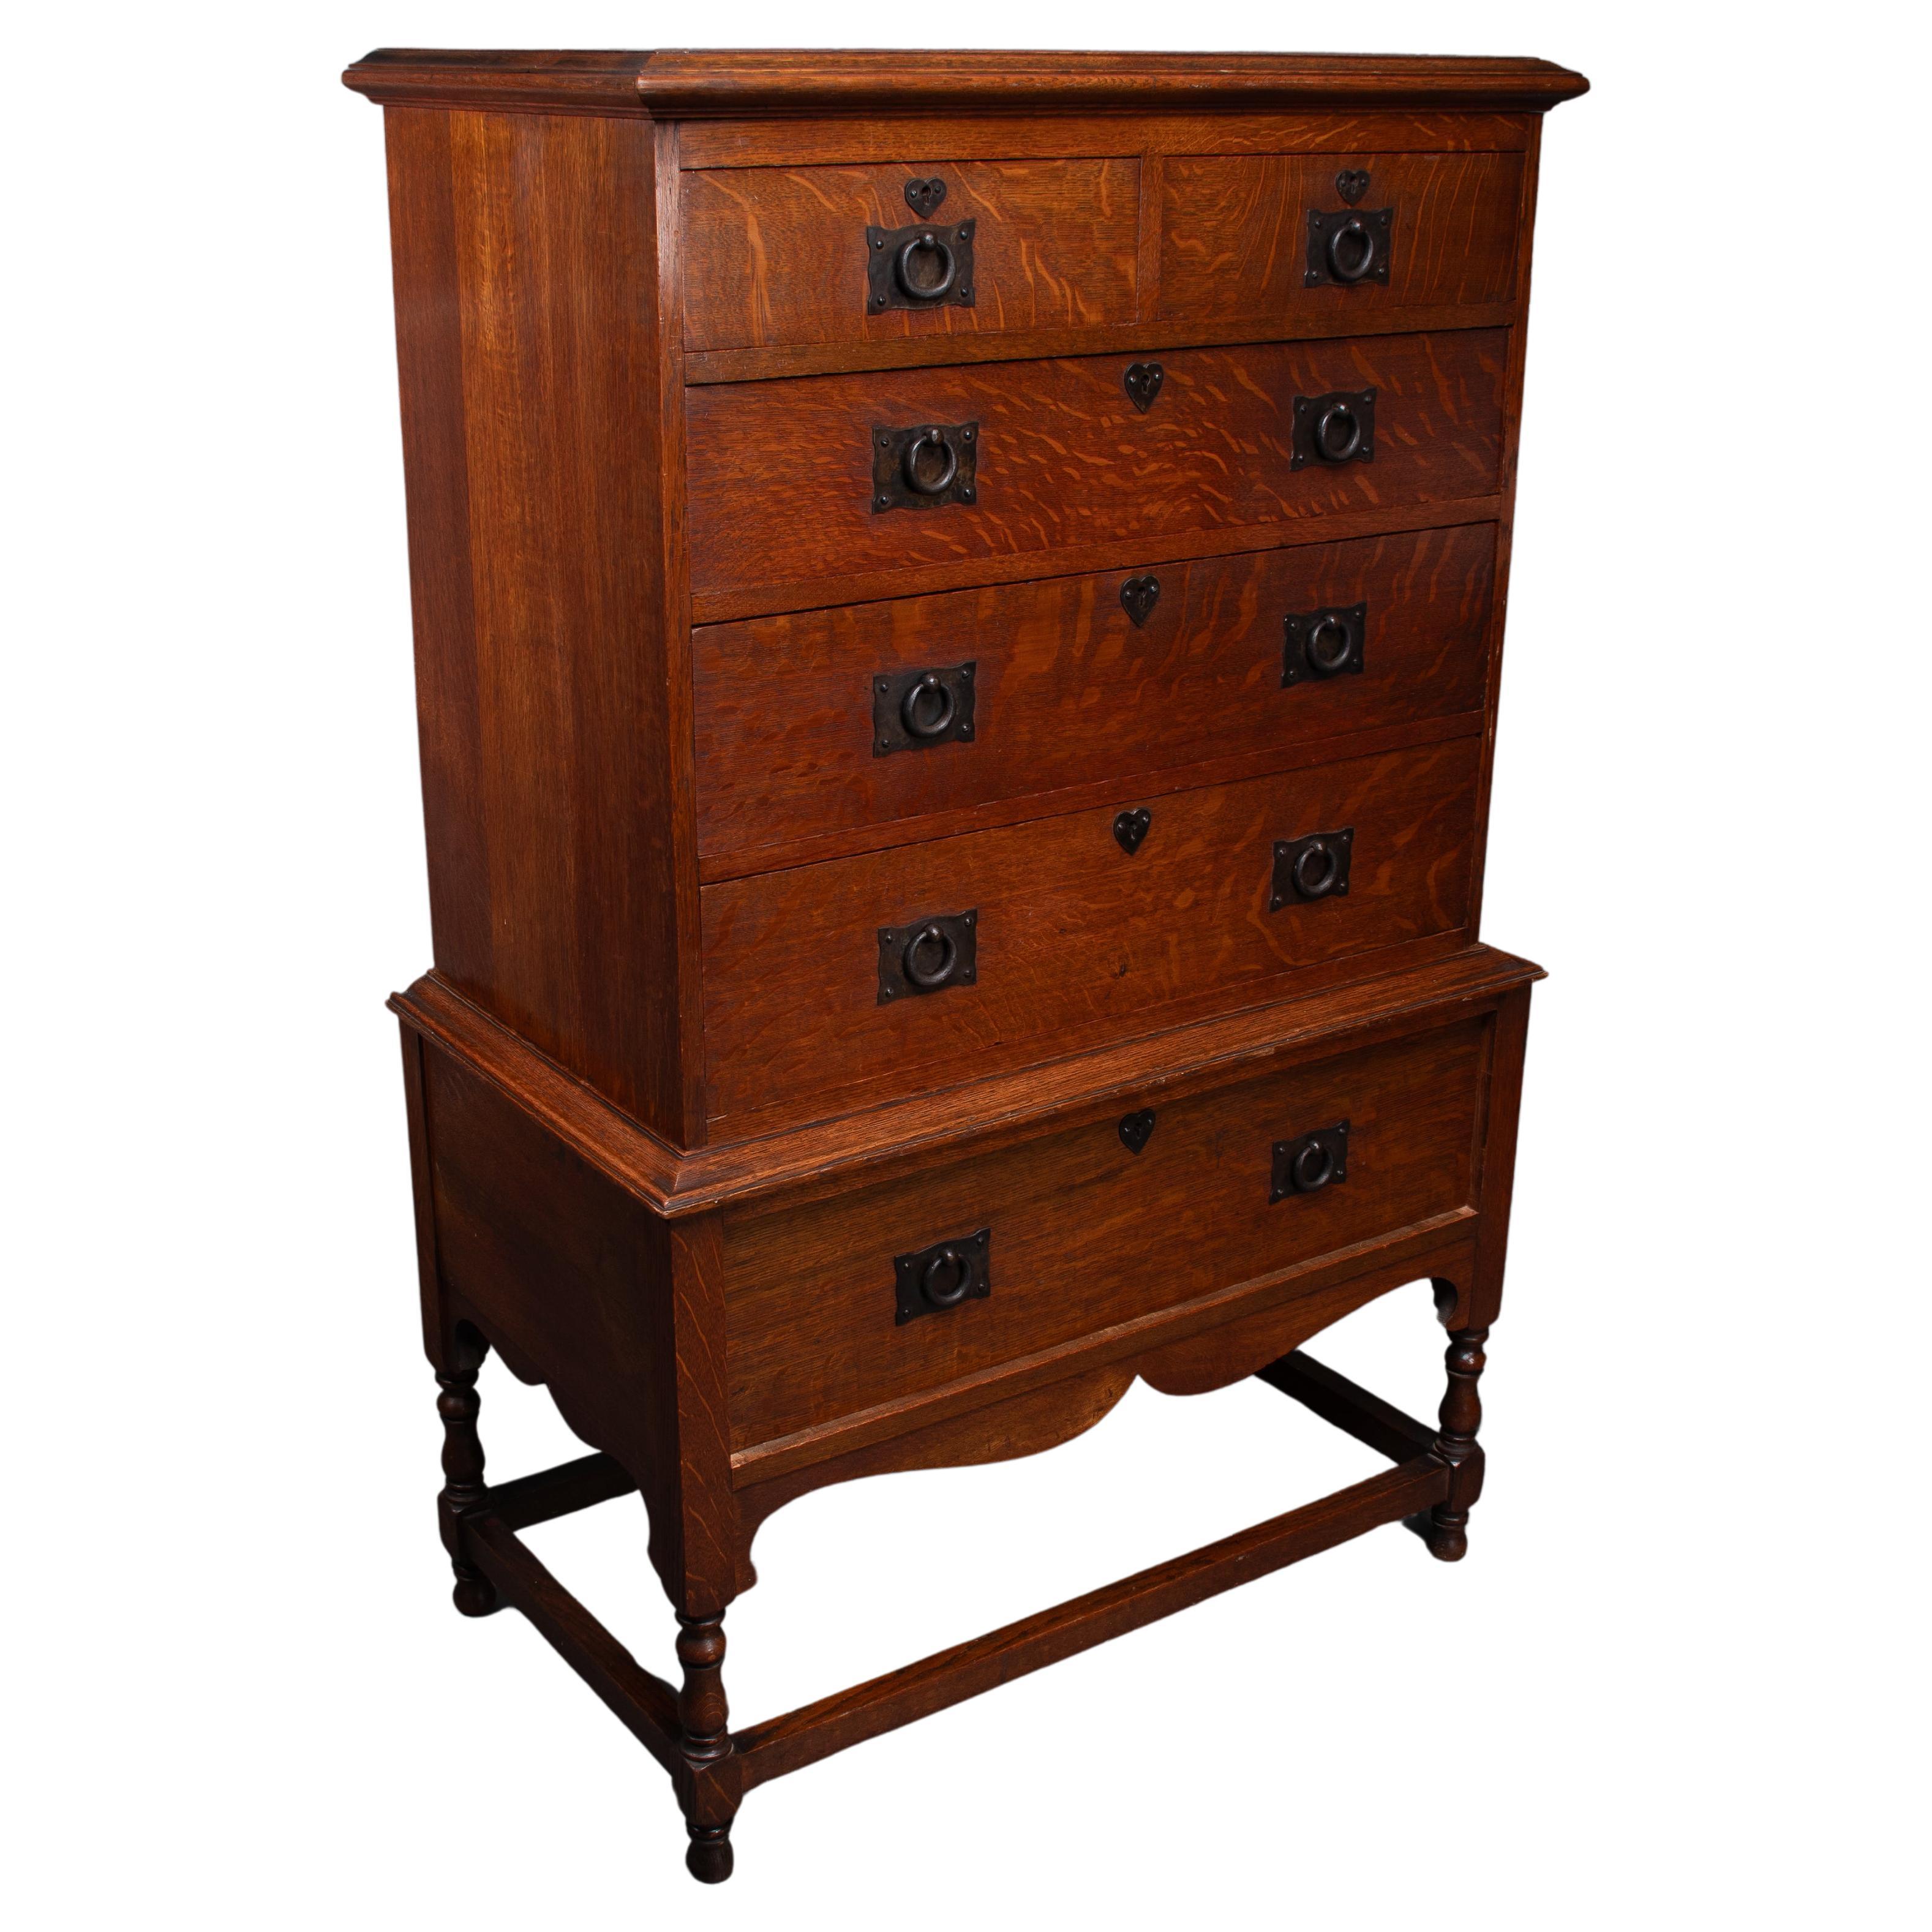 Ambrose Heal A Rare Mansfield Oak Chest of Drawers With Iron Heart Escutcheons For Sale